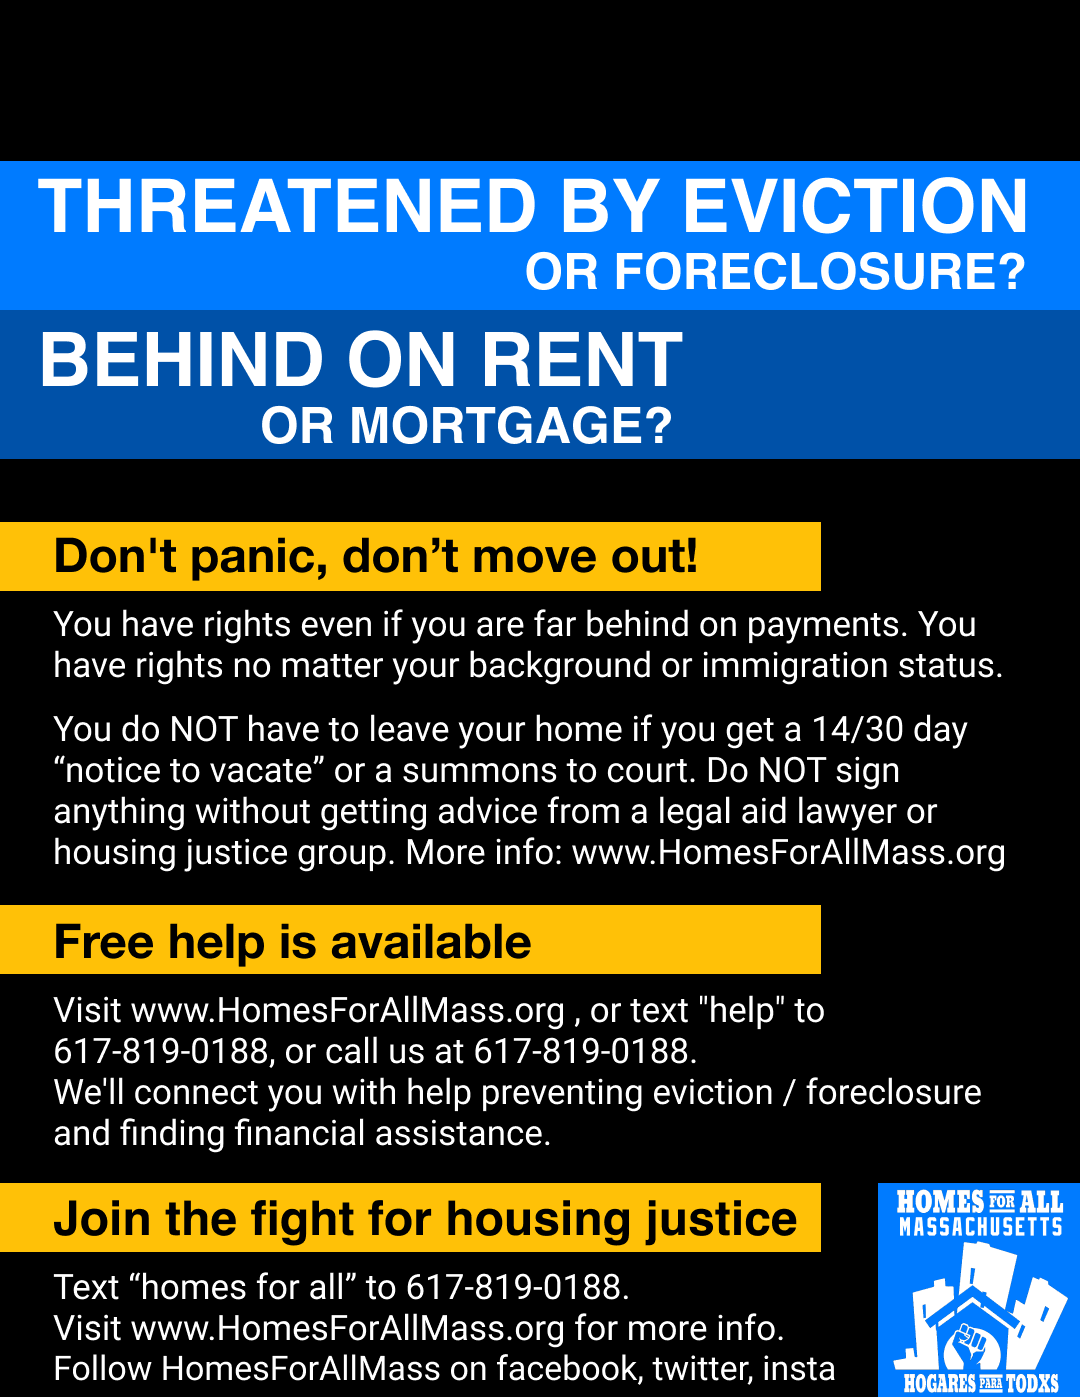 flyer about rights of tenants and homeowners following end of eviction moratorium